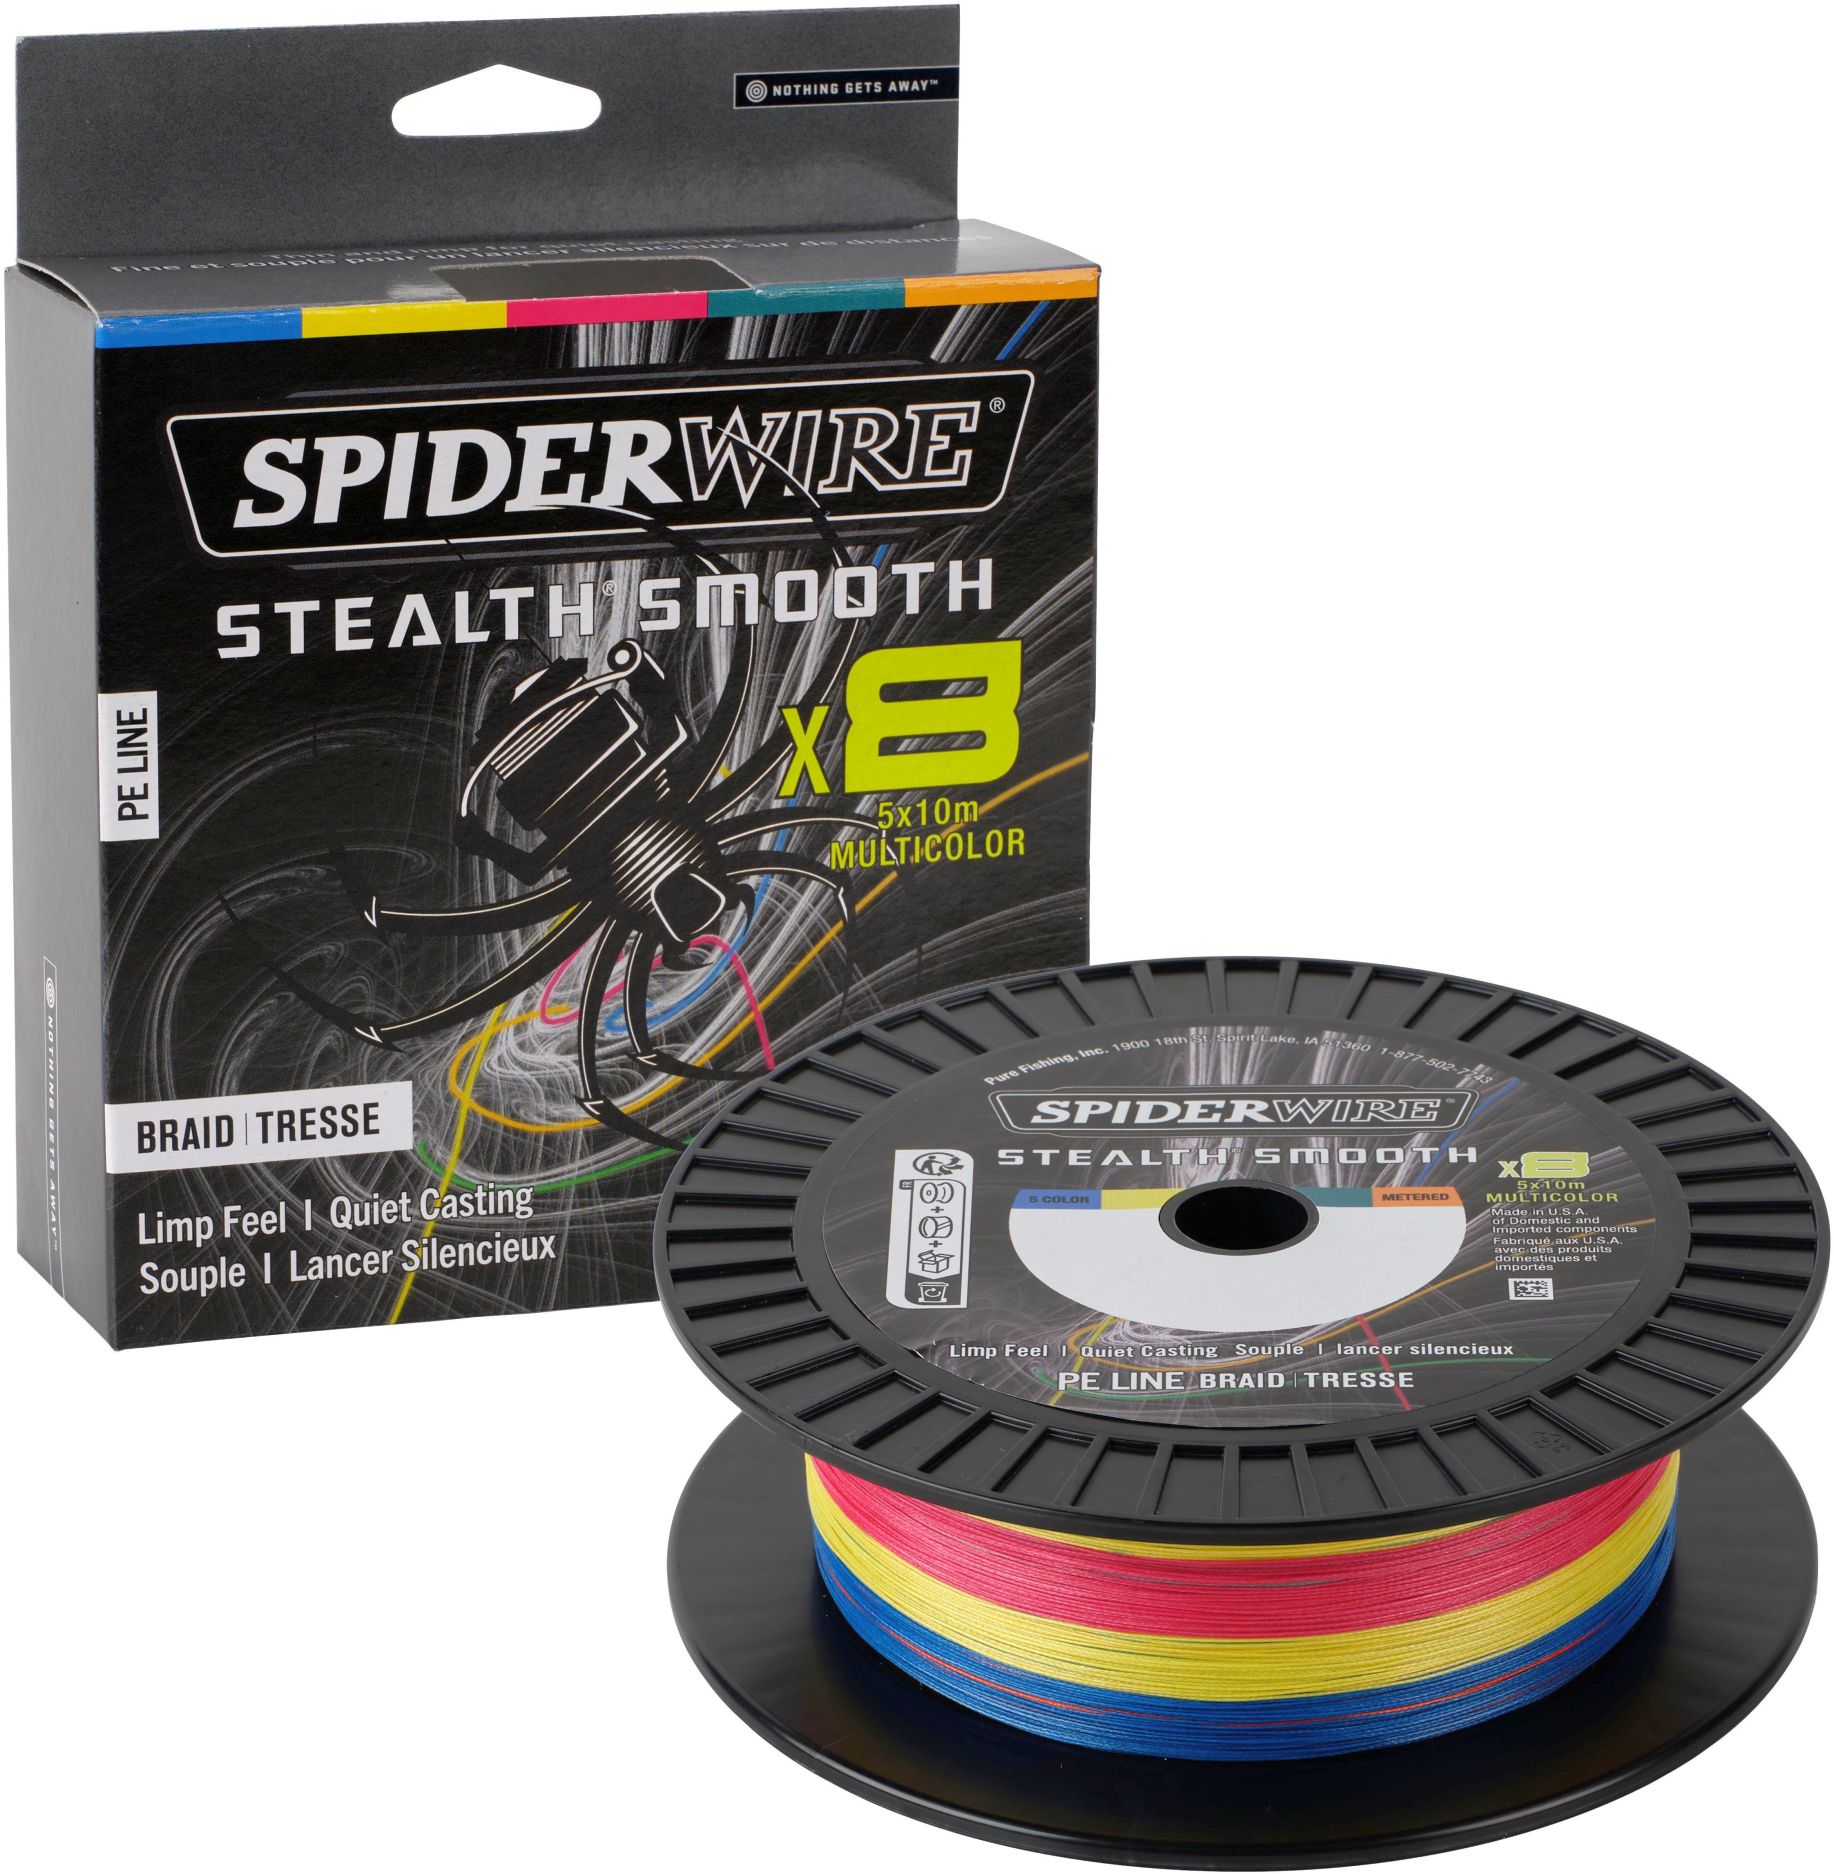 SPIDERWIRE Stealth Smooth 8 Multicolor 600 m 0,15 mm 16,5 kg